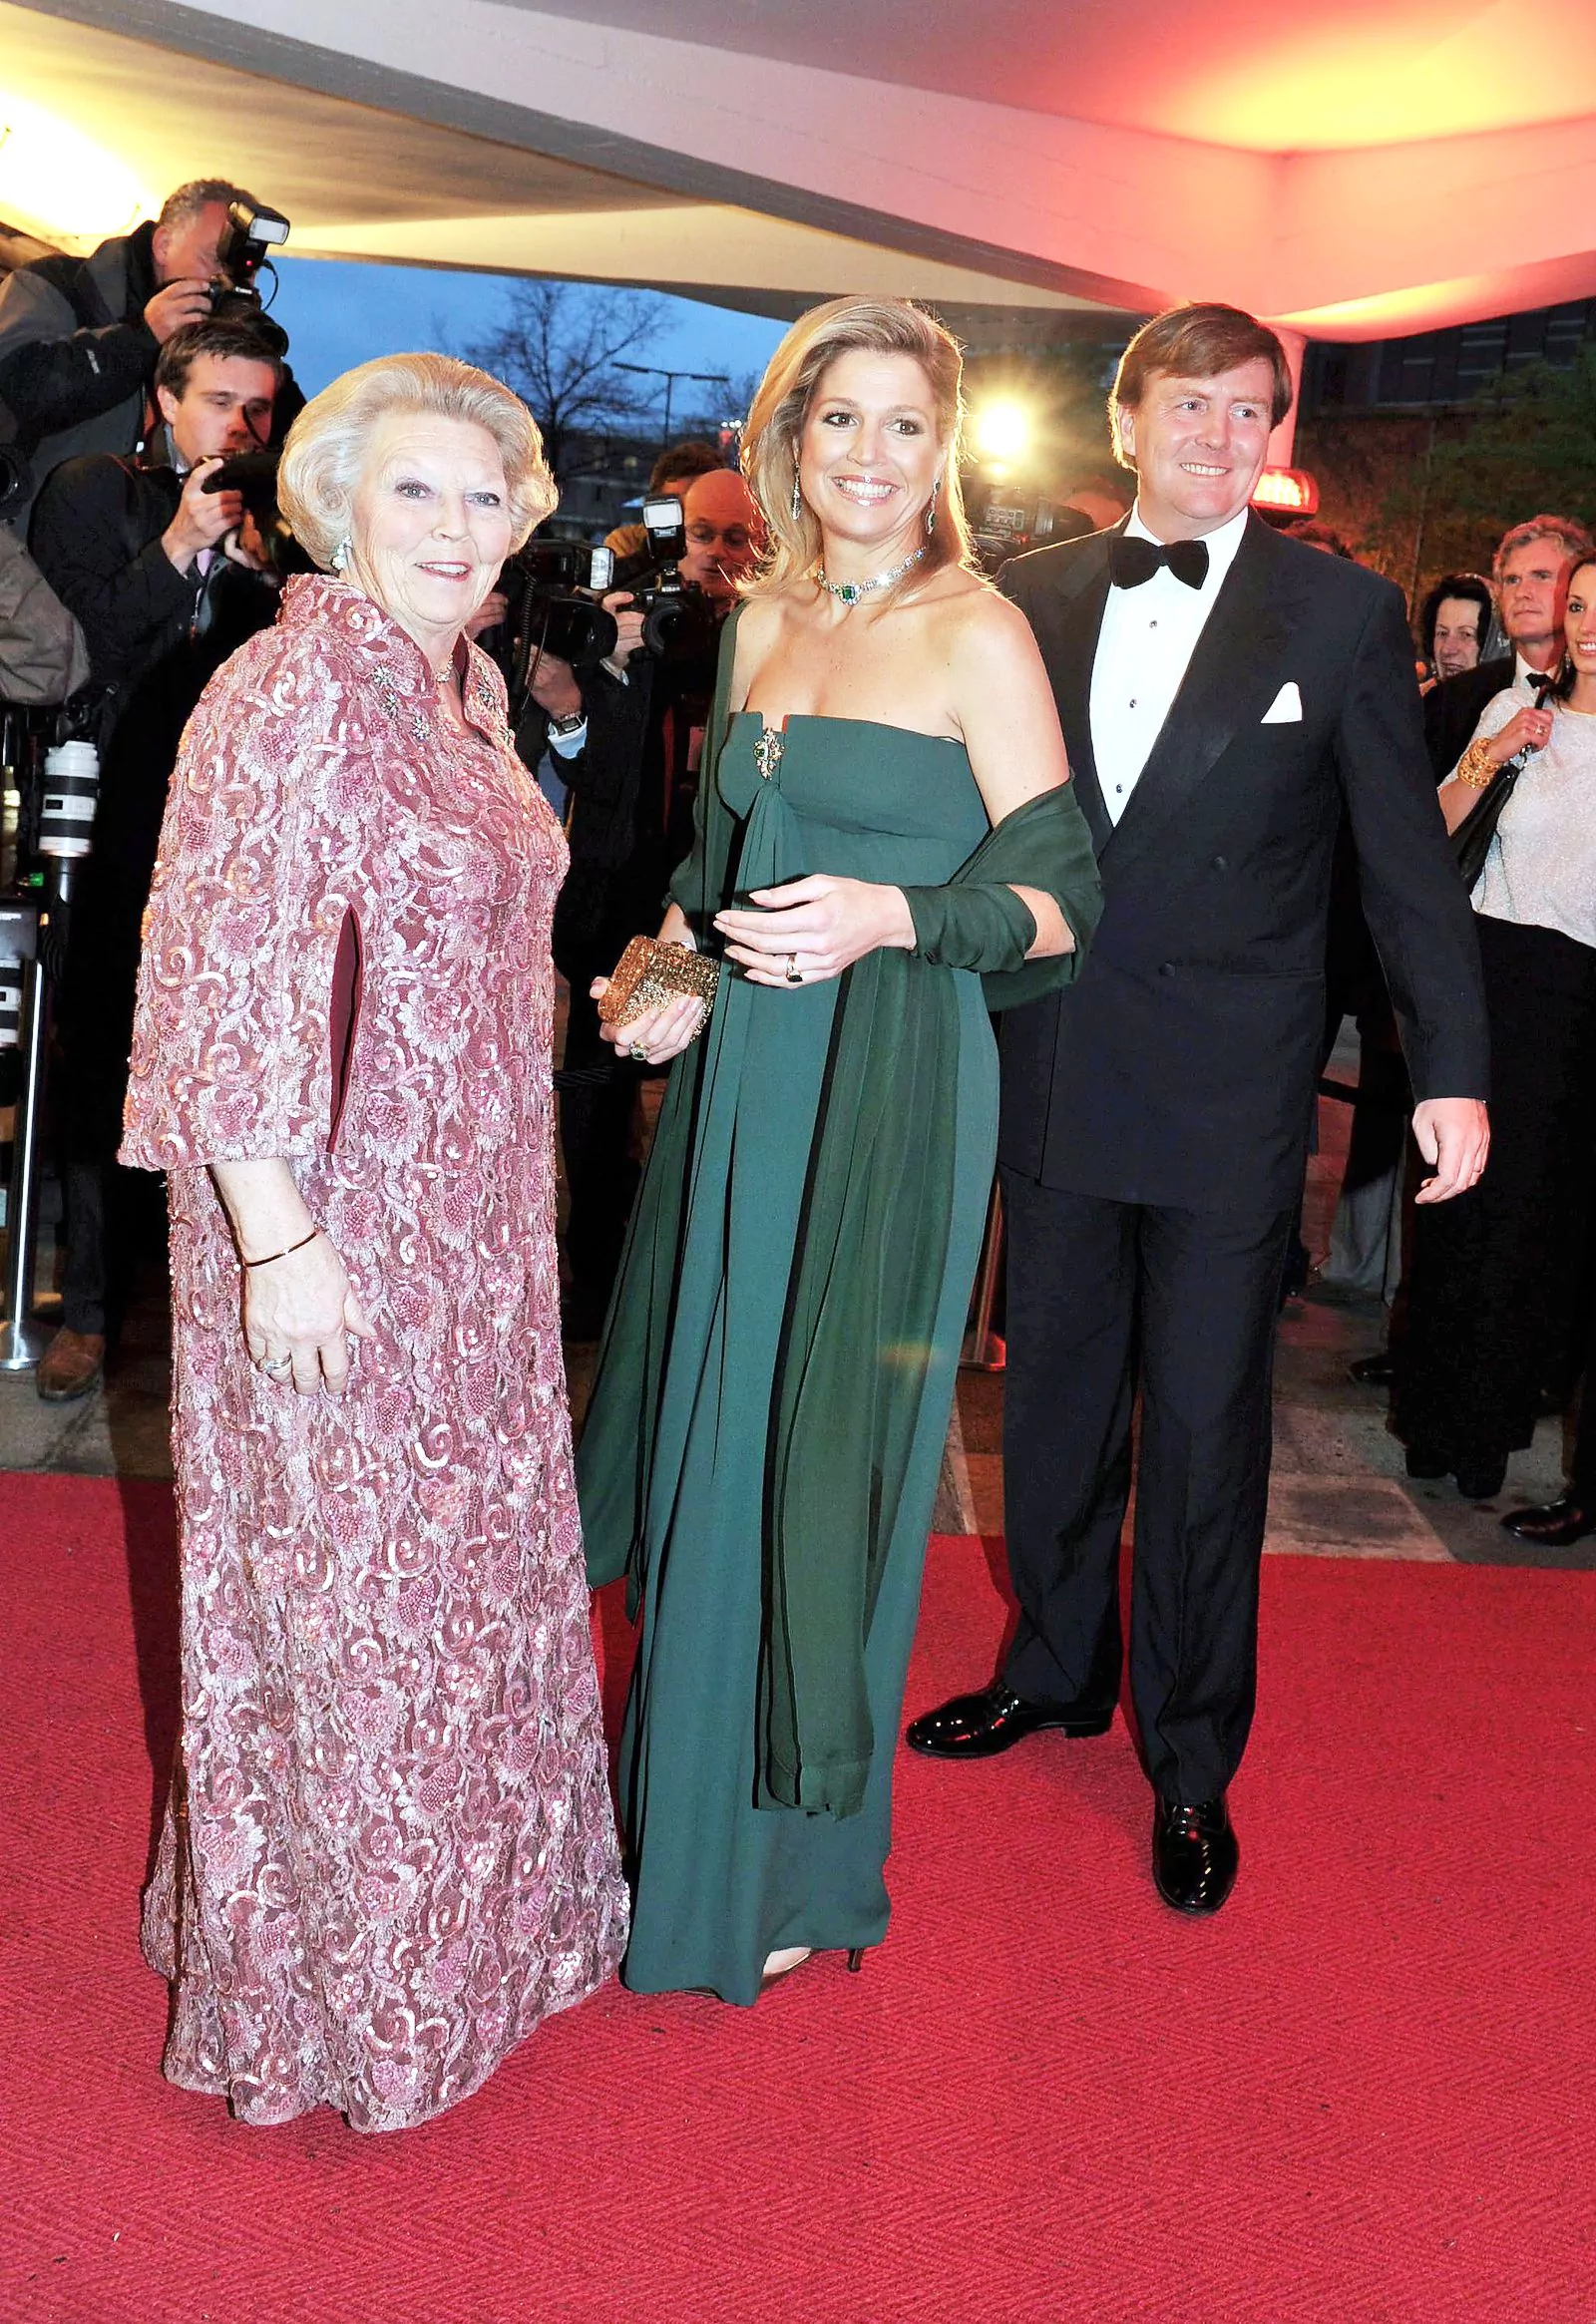 Queen Beatrix of the Netherlands, Princess Maxima and Prince Willem-Alexander